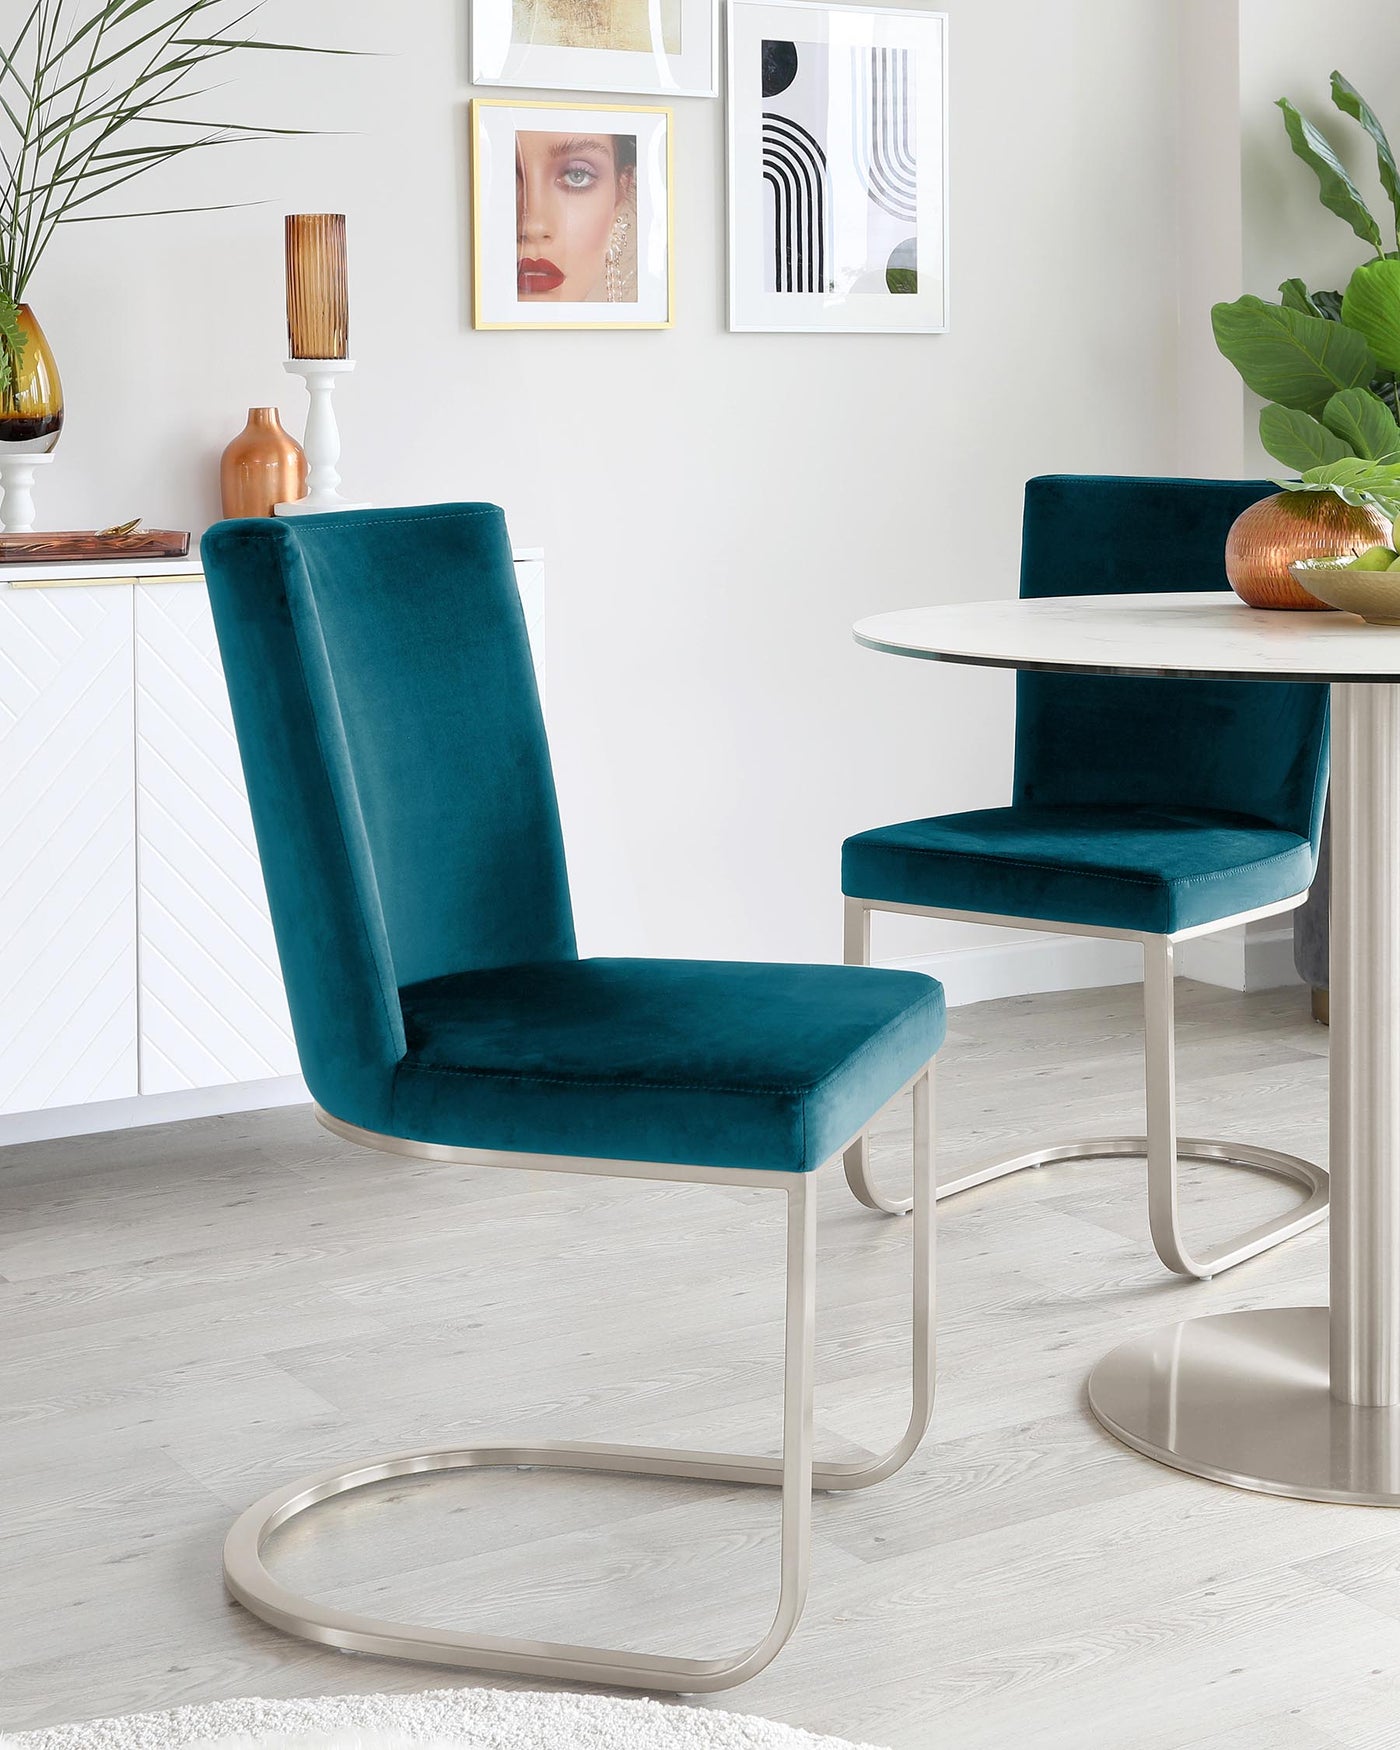 Elegant modern dining room featuring two sleek teal velvet chairs with a unique U-shaped metallic base, complementing a white round marble-top table with a cylindrical metallic base, set on a light wooden floor with a small white rug beneath.